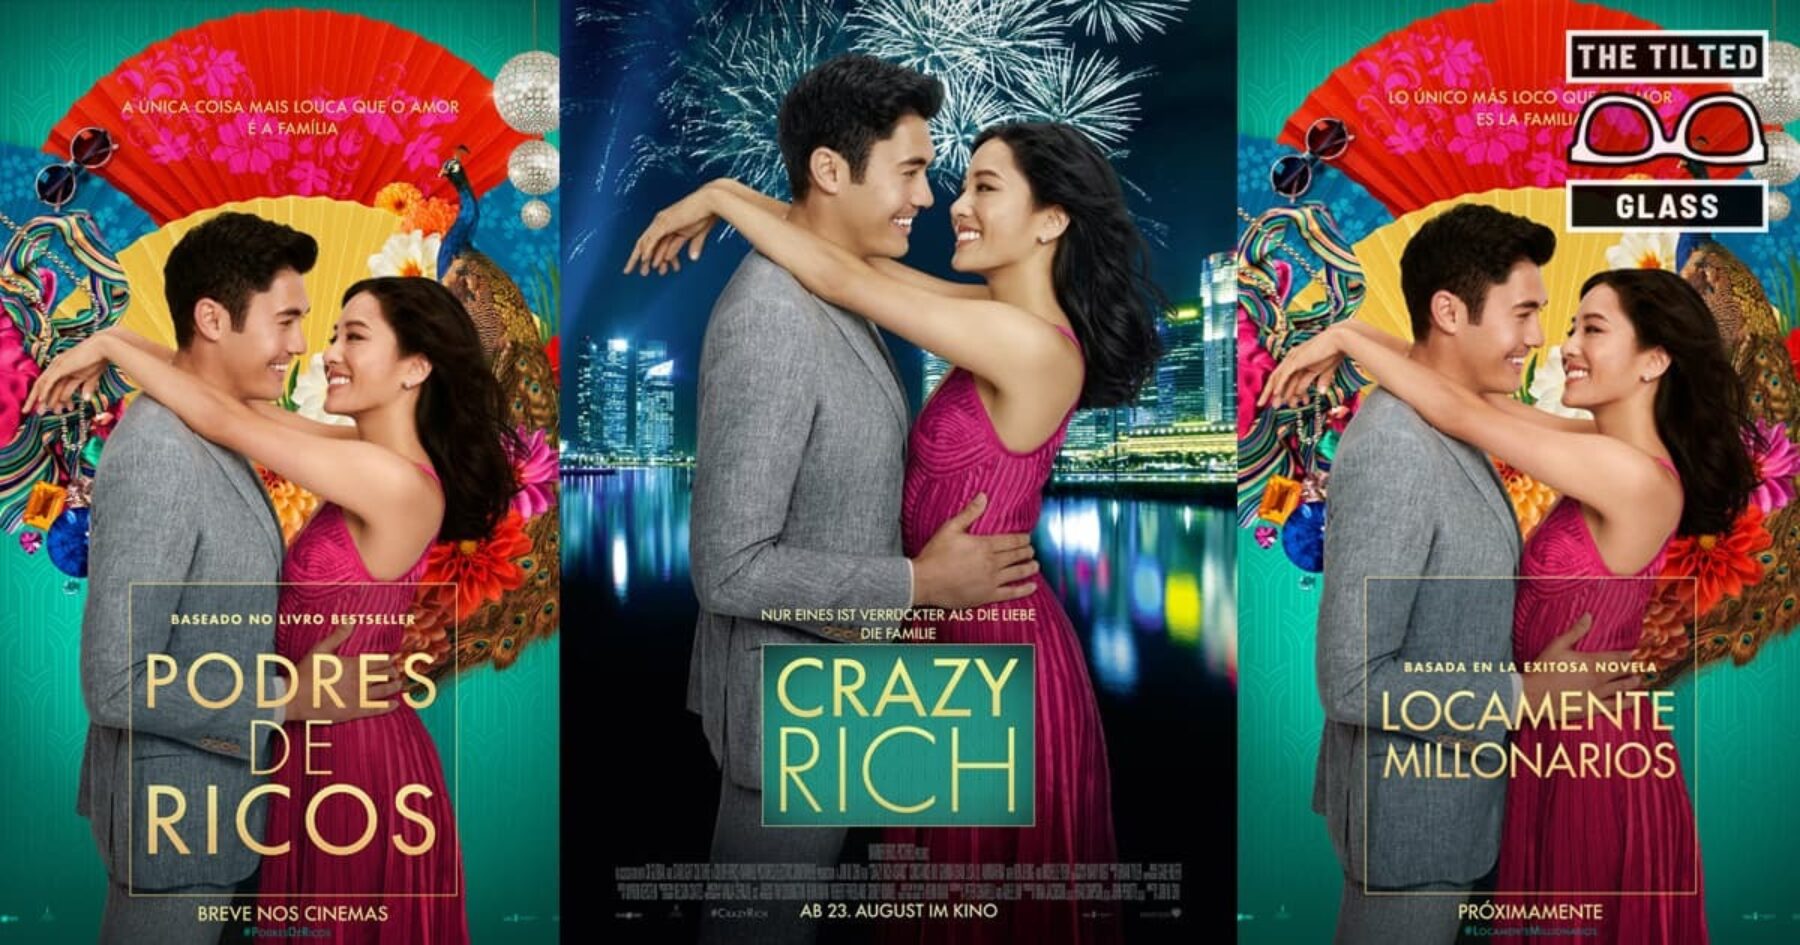 Hmm: “Asians” Removed from “Crazy Rich Asians” Movie Translations